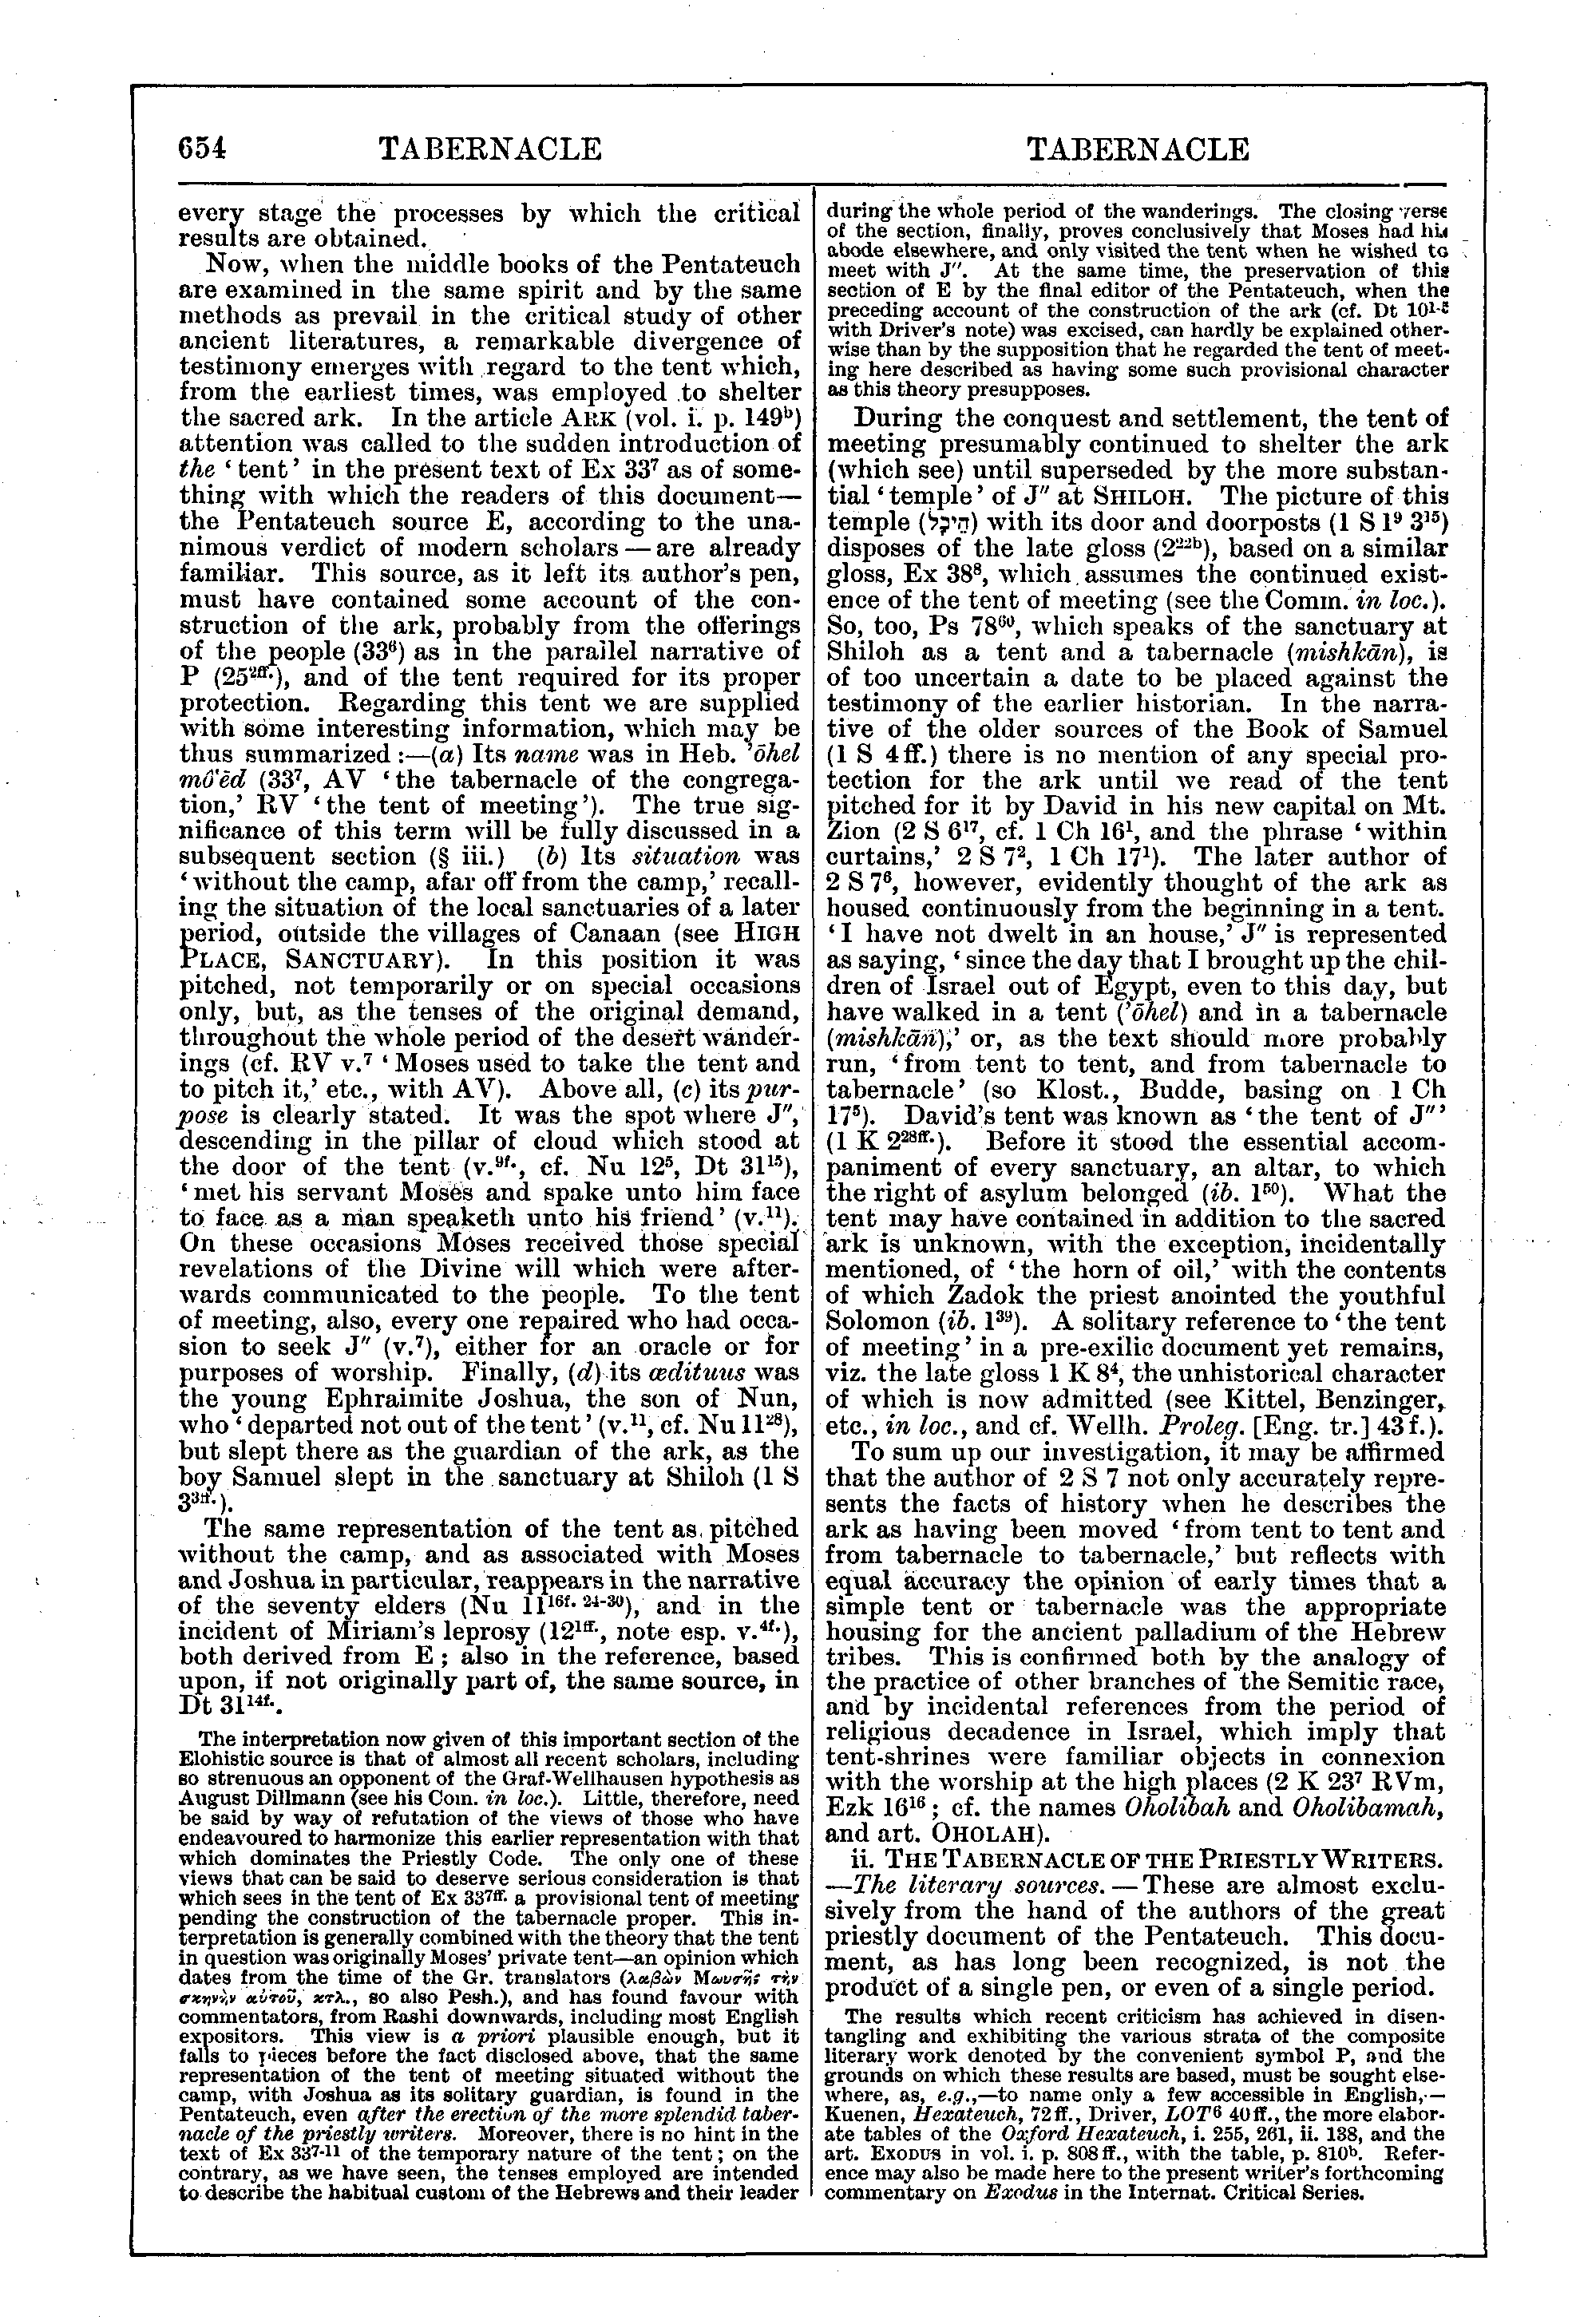 Image of page 654